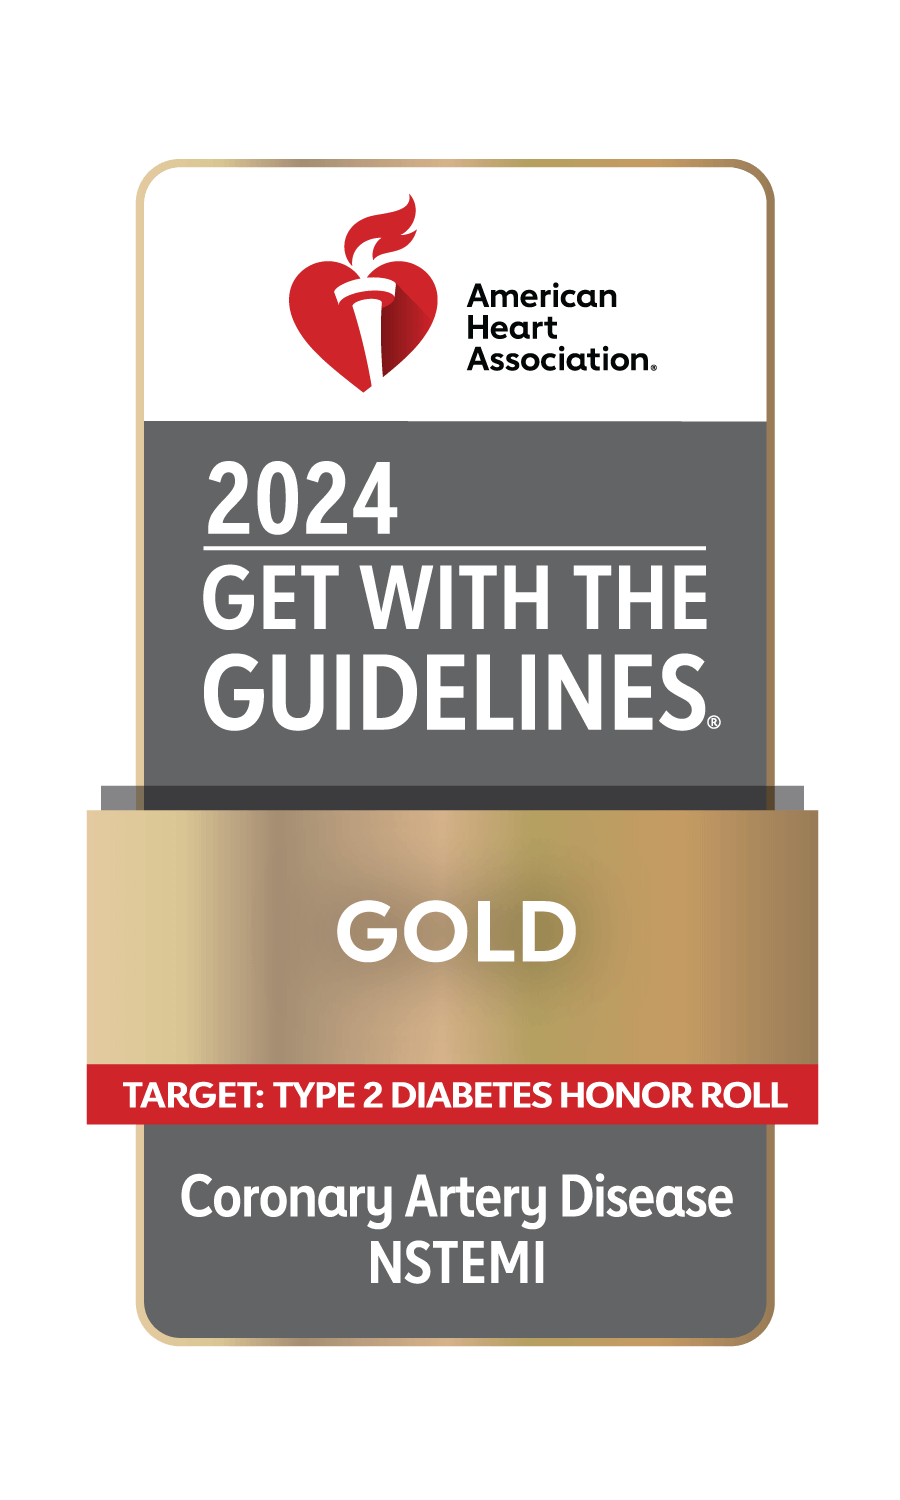 Get With The Guidelines 2024 Award